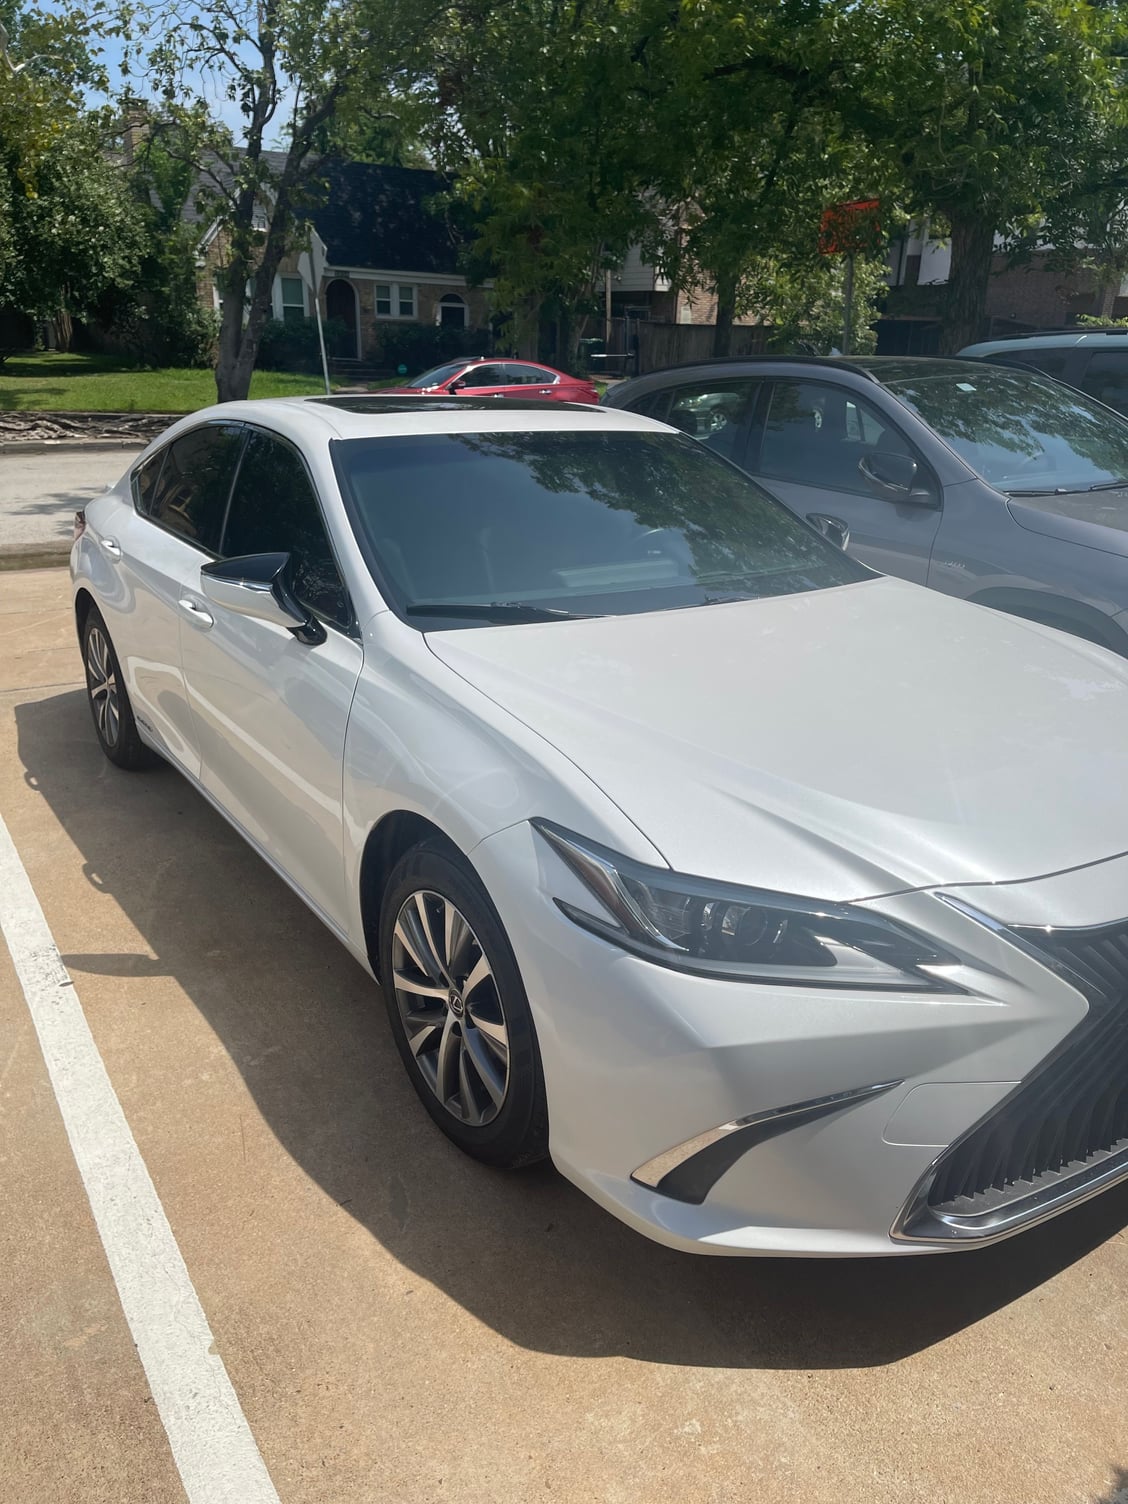 Welcome to Club Lexus! 7ES owner roll call & member introduction thread,  POST HERE! - Page 18 - ClubLexus - Lexus Forum Discussion